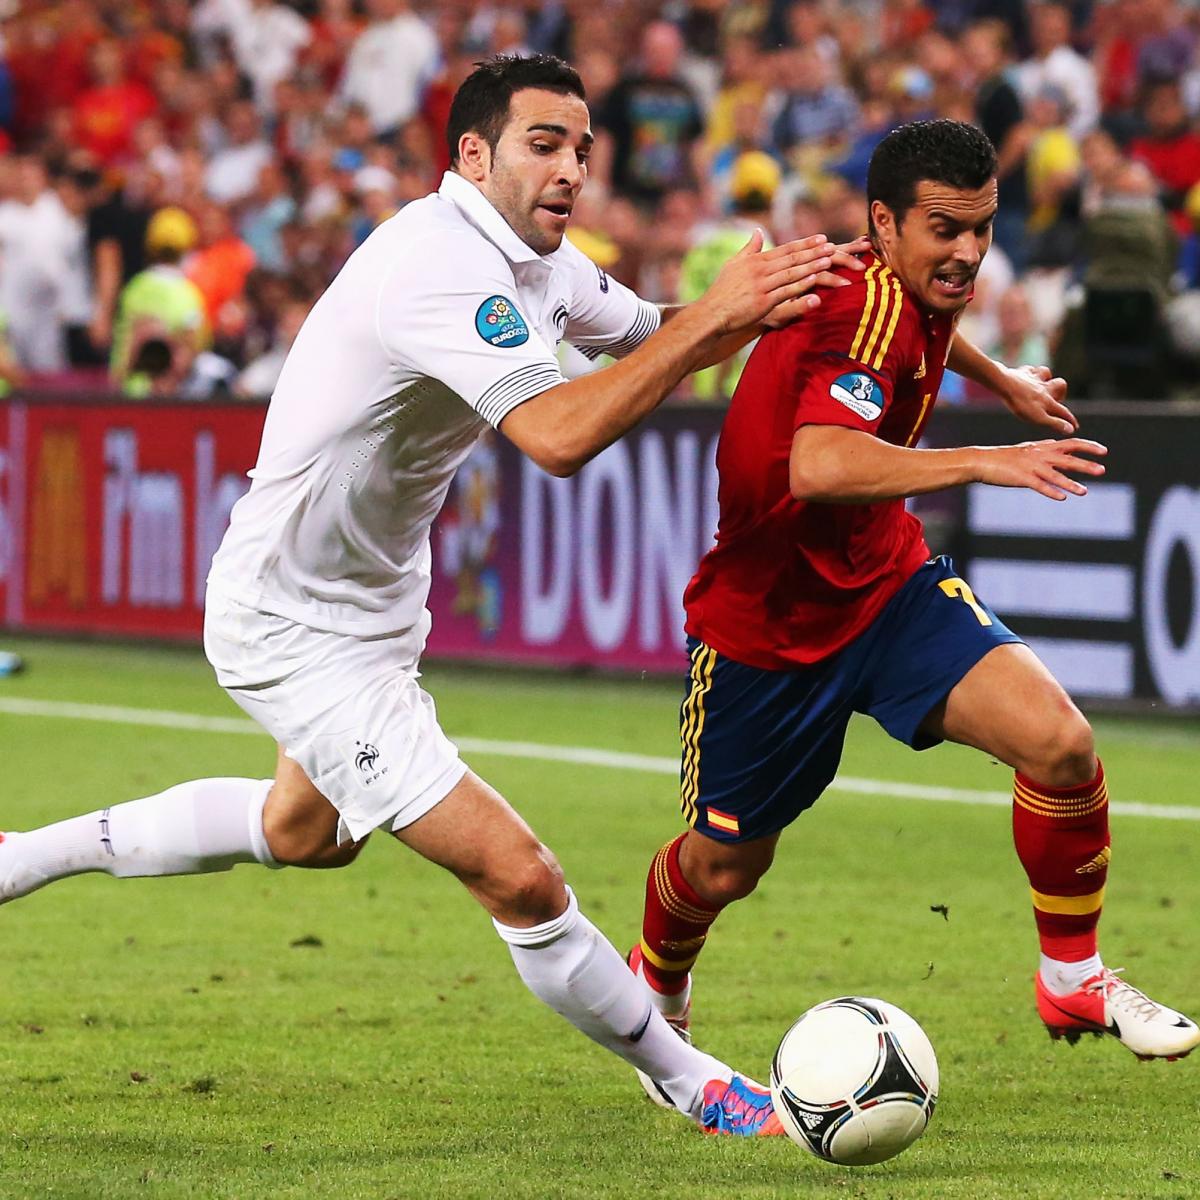 Spain vs. France: 6 Things to Watch out for in the Key World Cup